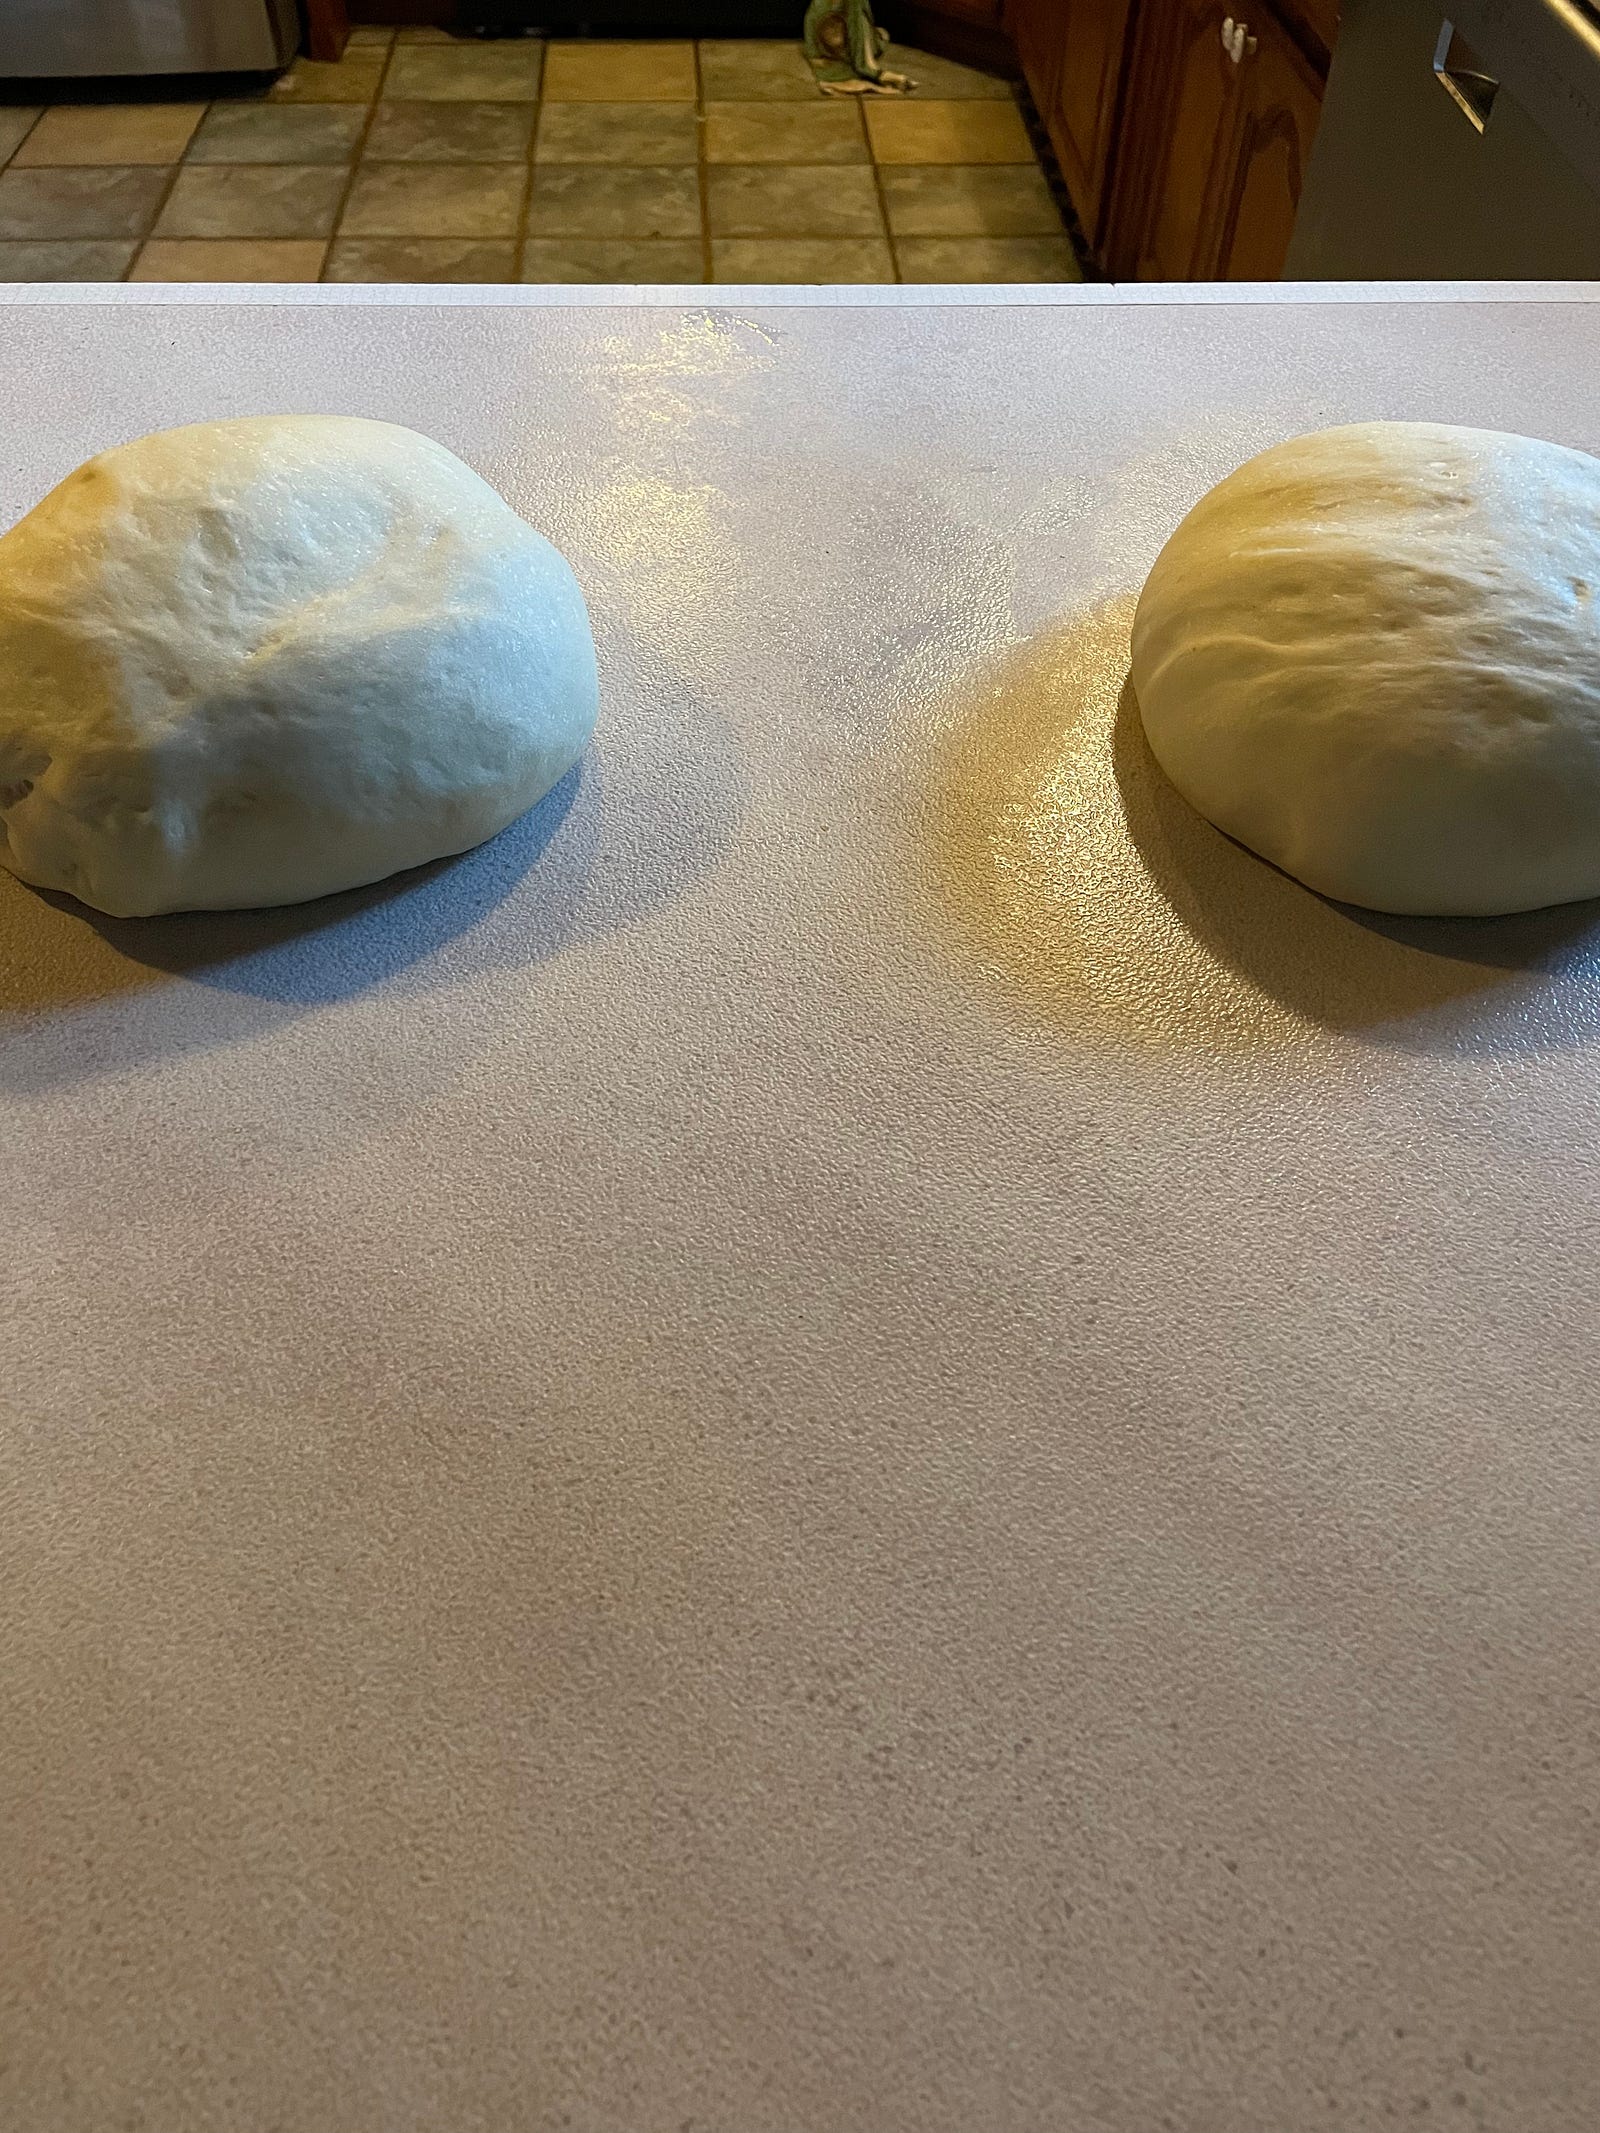 Two balls of dough on the countertop.